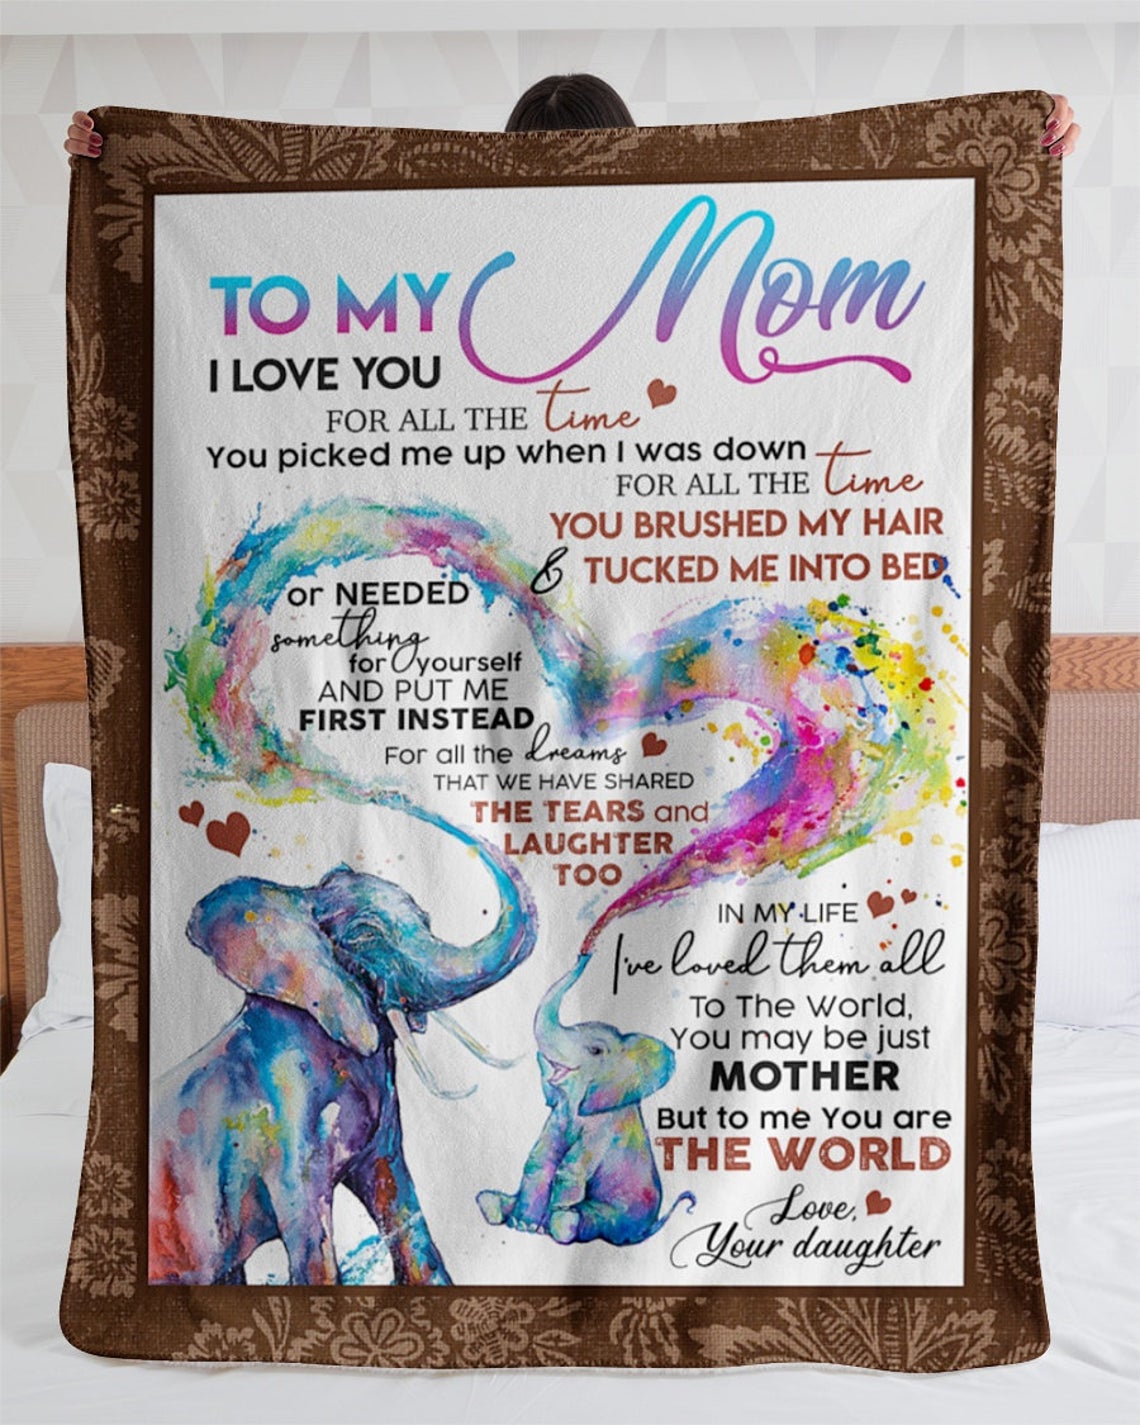 Personalized To My Mom Blanket, Mothers Day Gift, you are the world, Elephant Mom Blanket , Mother's Day 2021 Blanket Gifts